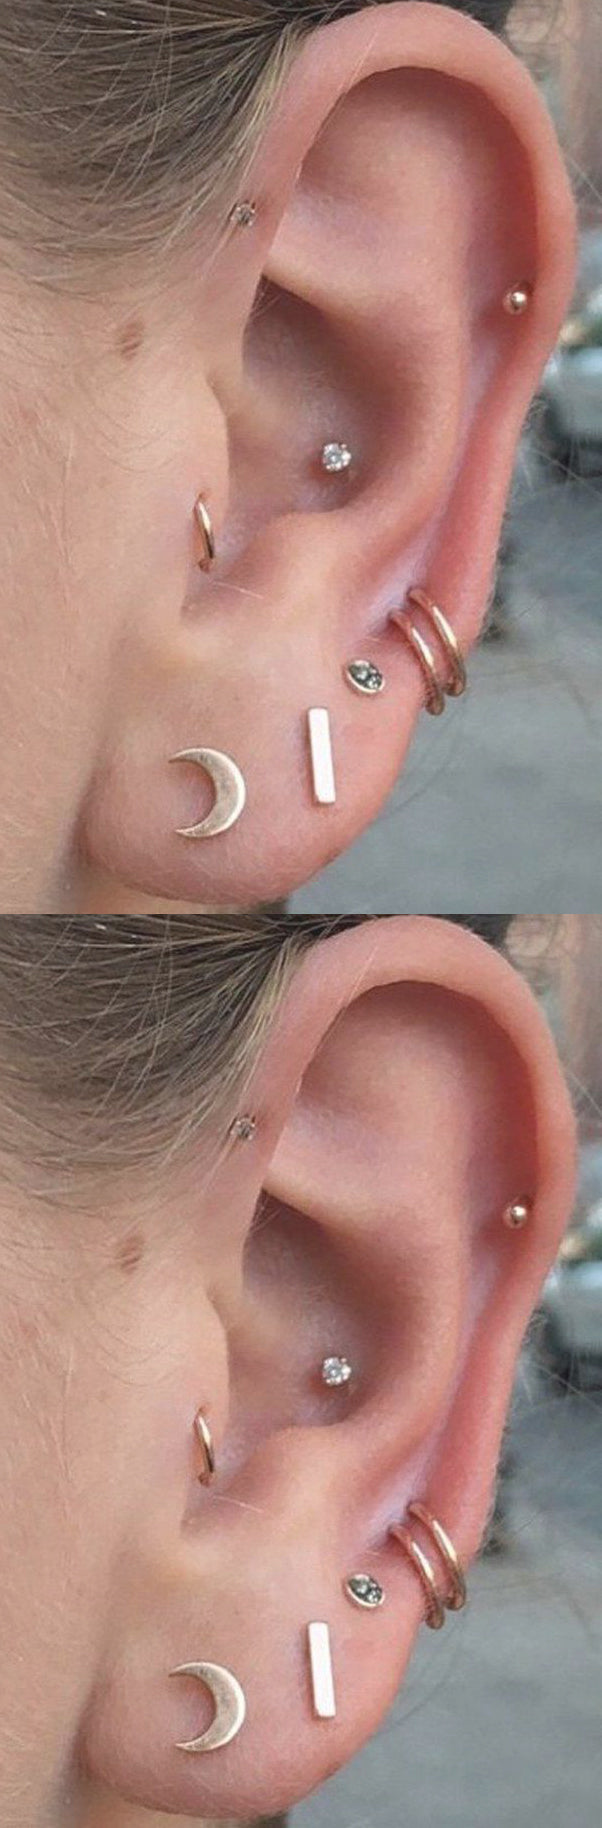 Simple and Pretty Multiple Ear Piercing Ideas at MyBodiArt.com - Moon and Stars Cartilage Conch Tragus Rook Daith Pinna Helix Earring Jewelry 